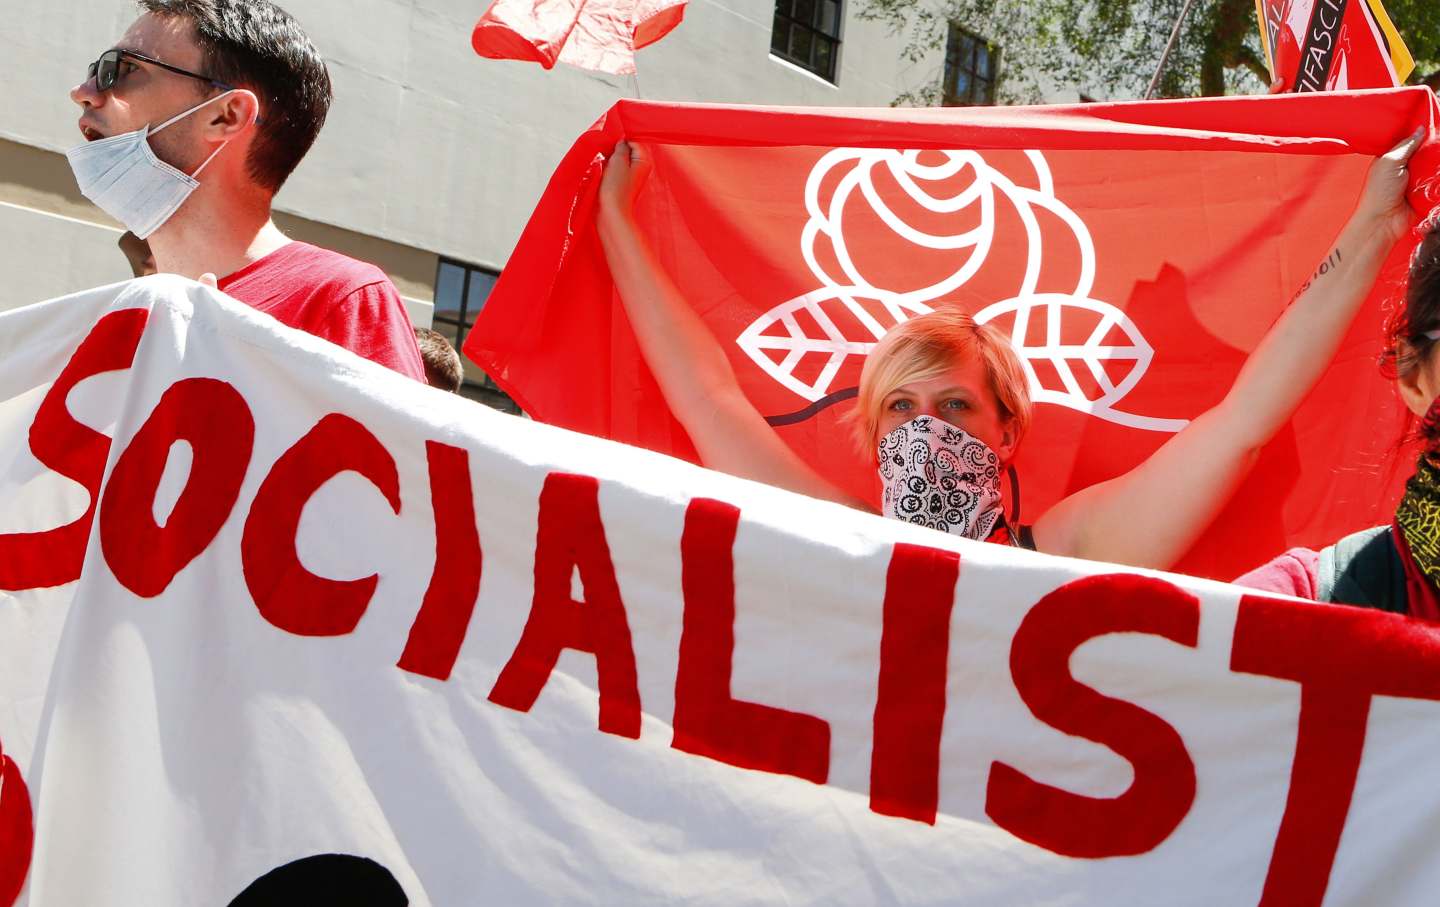 Democratic Socialists of America counter protesters hold signs and flags as they march, protesting an alt-right rally on August 5, 2018 in downtown Berkeley, California.